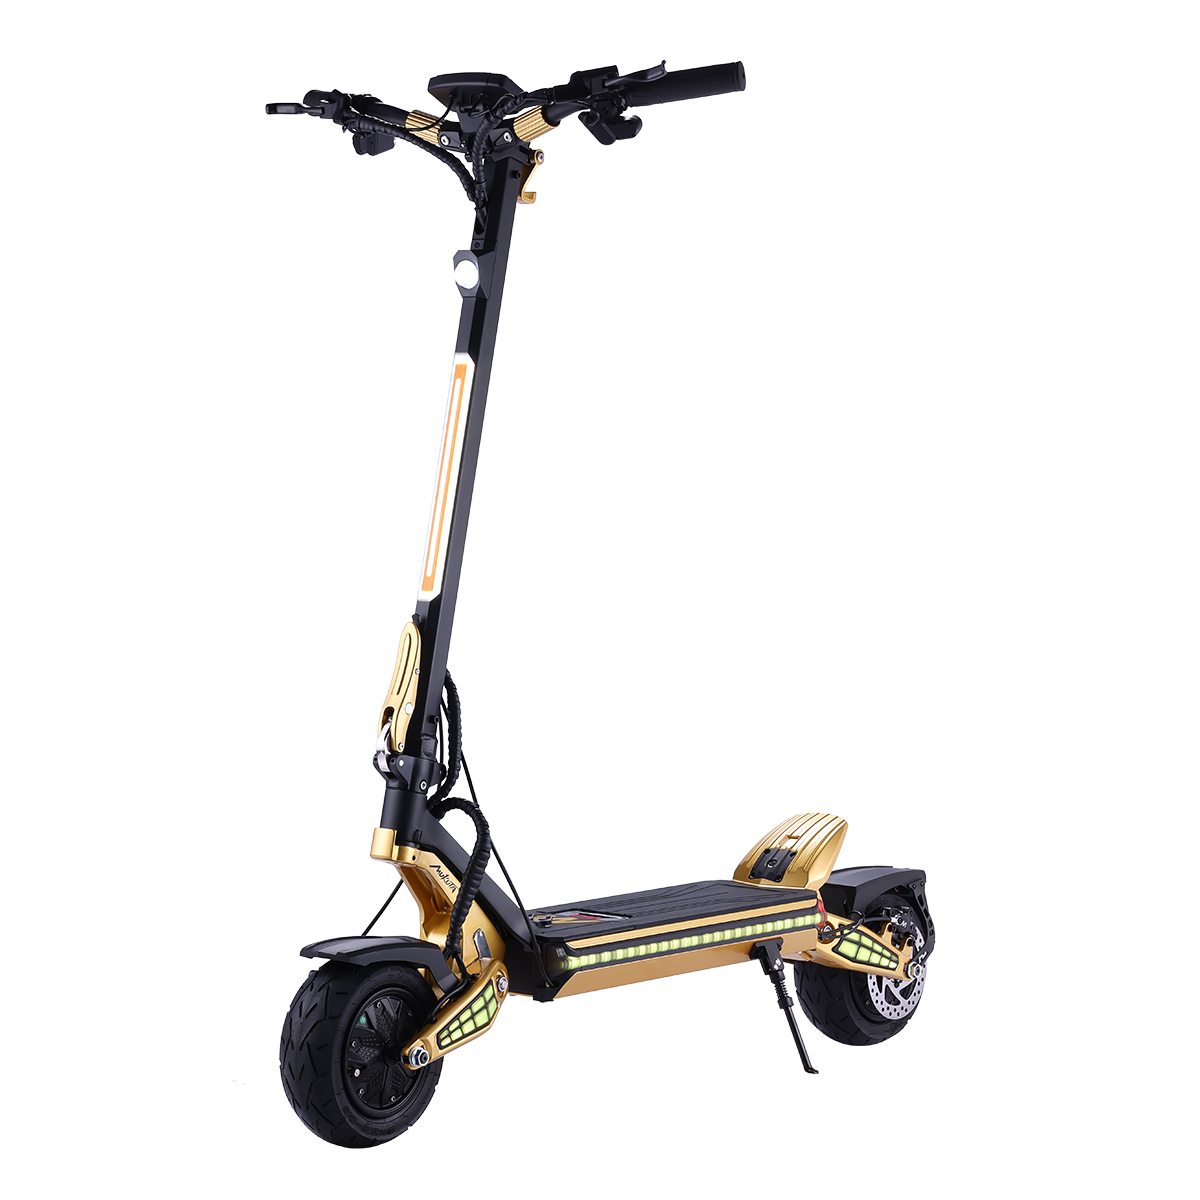 MUKUTA 9 Plus Electric Scooter, Removable Battery,1600W Dual Motor, 46 Miles Range, 9 Inches Tubeless Tires